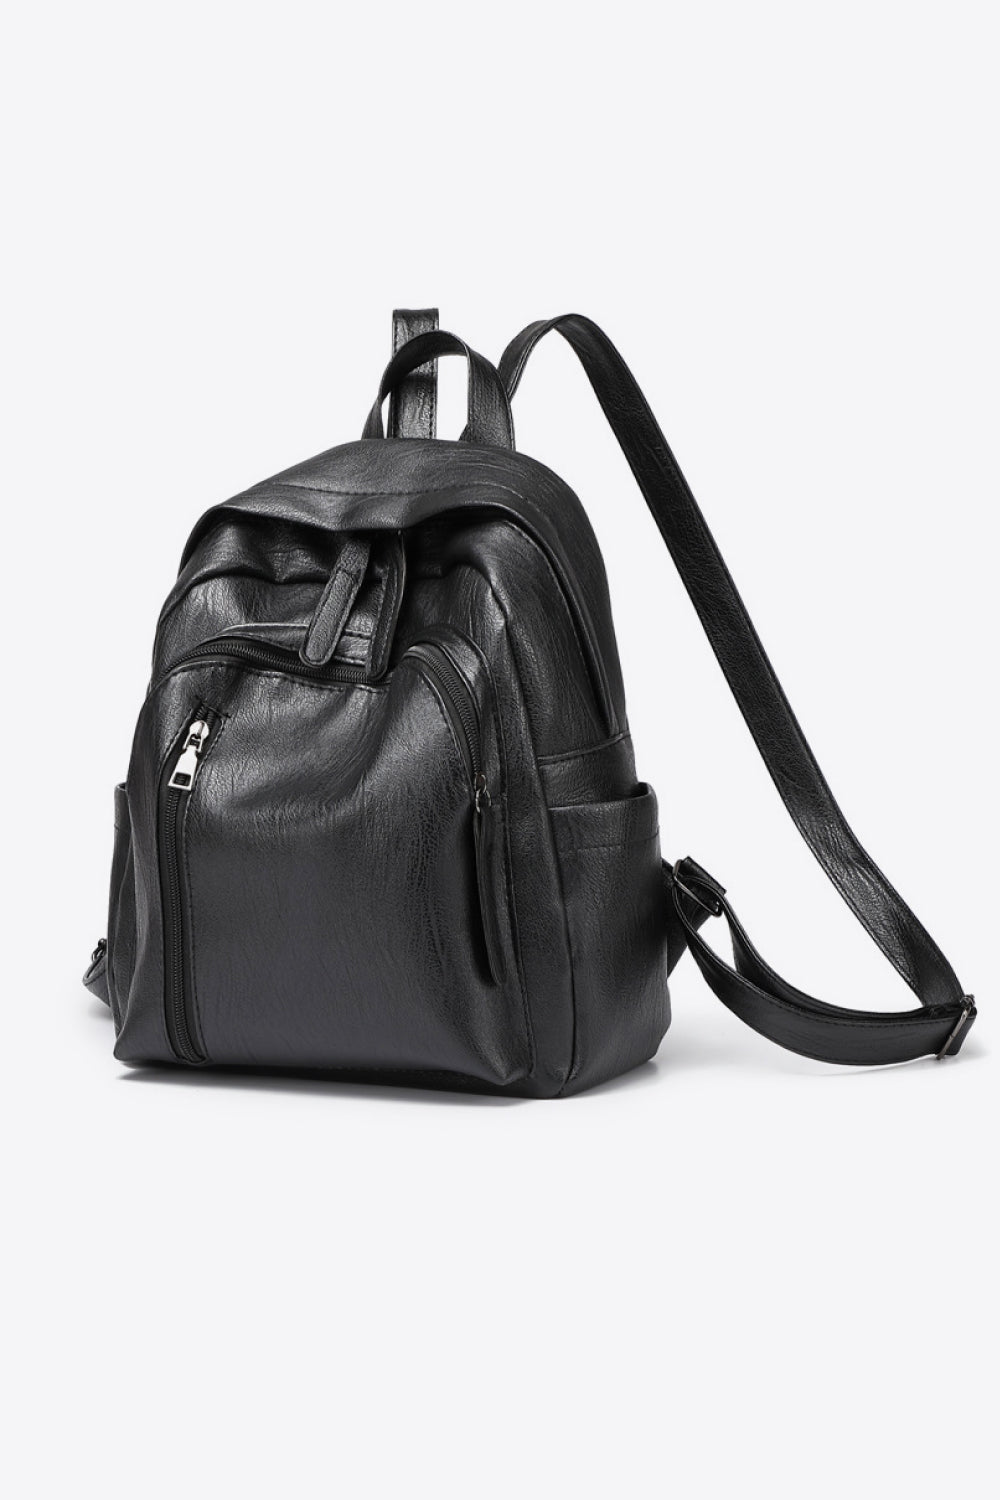 BLACK ONE SIZE - Black PU Leather Backpack - backpack at TFC&H Co.